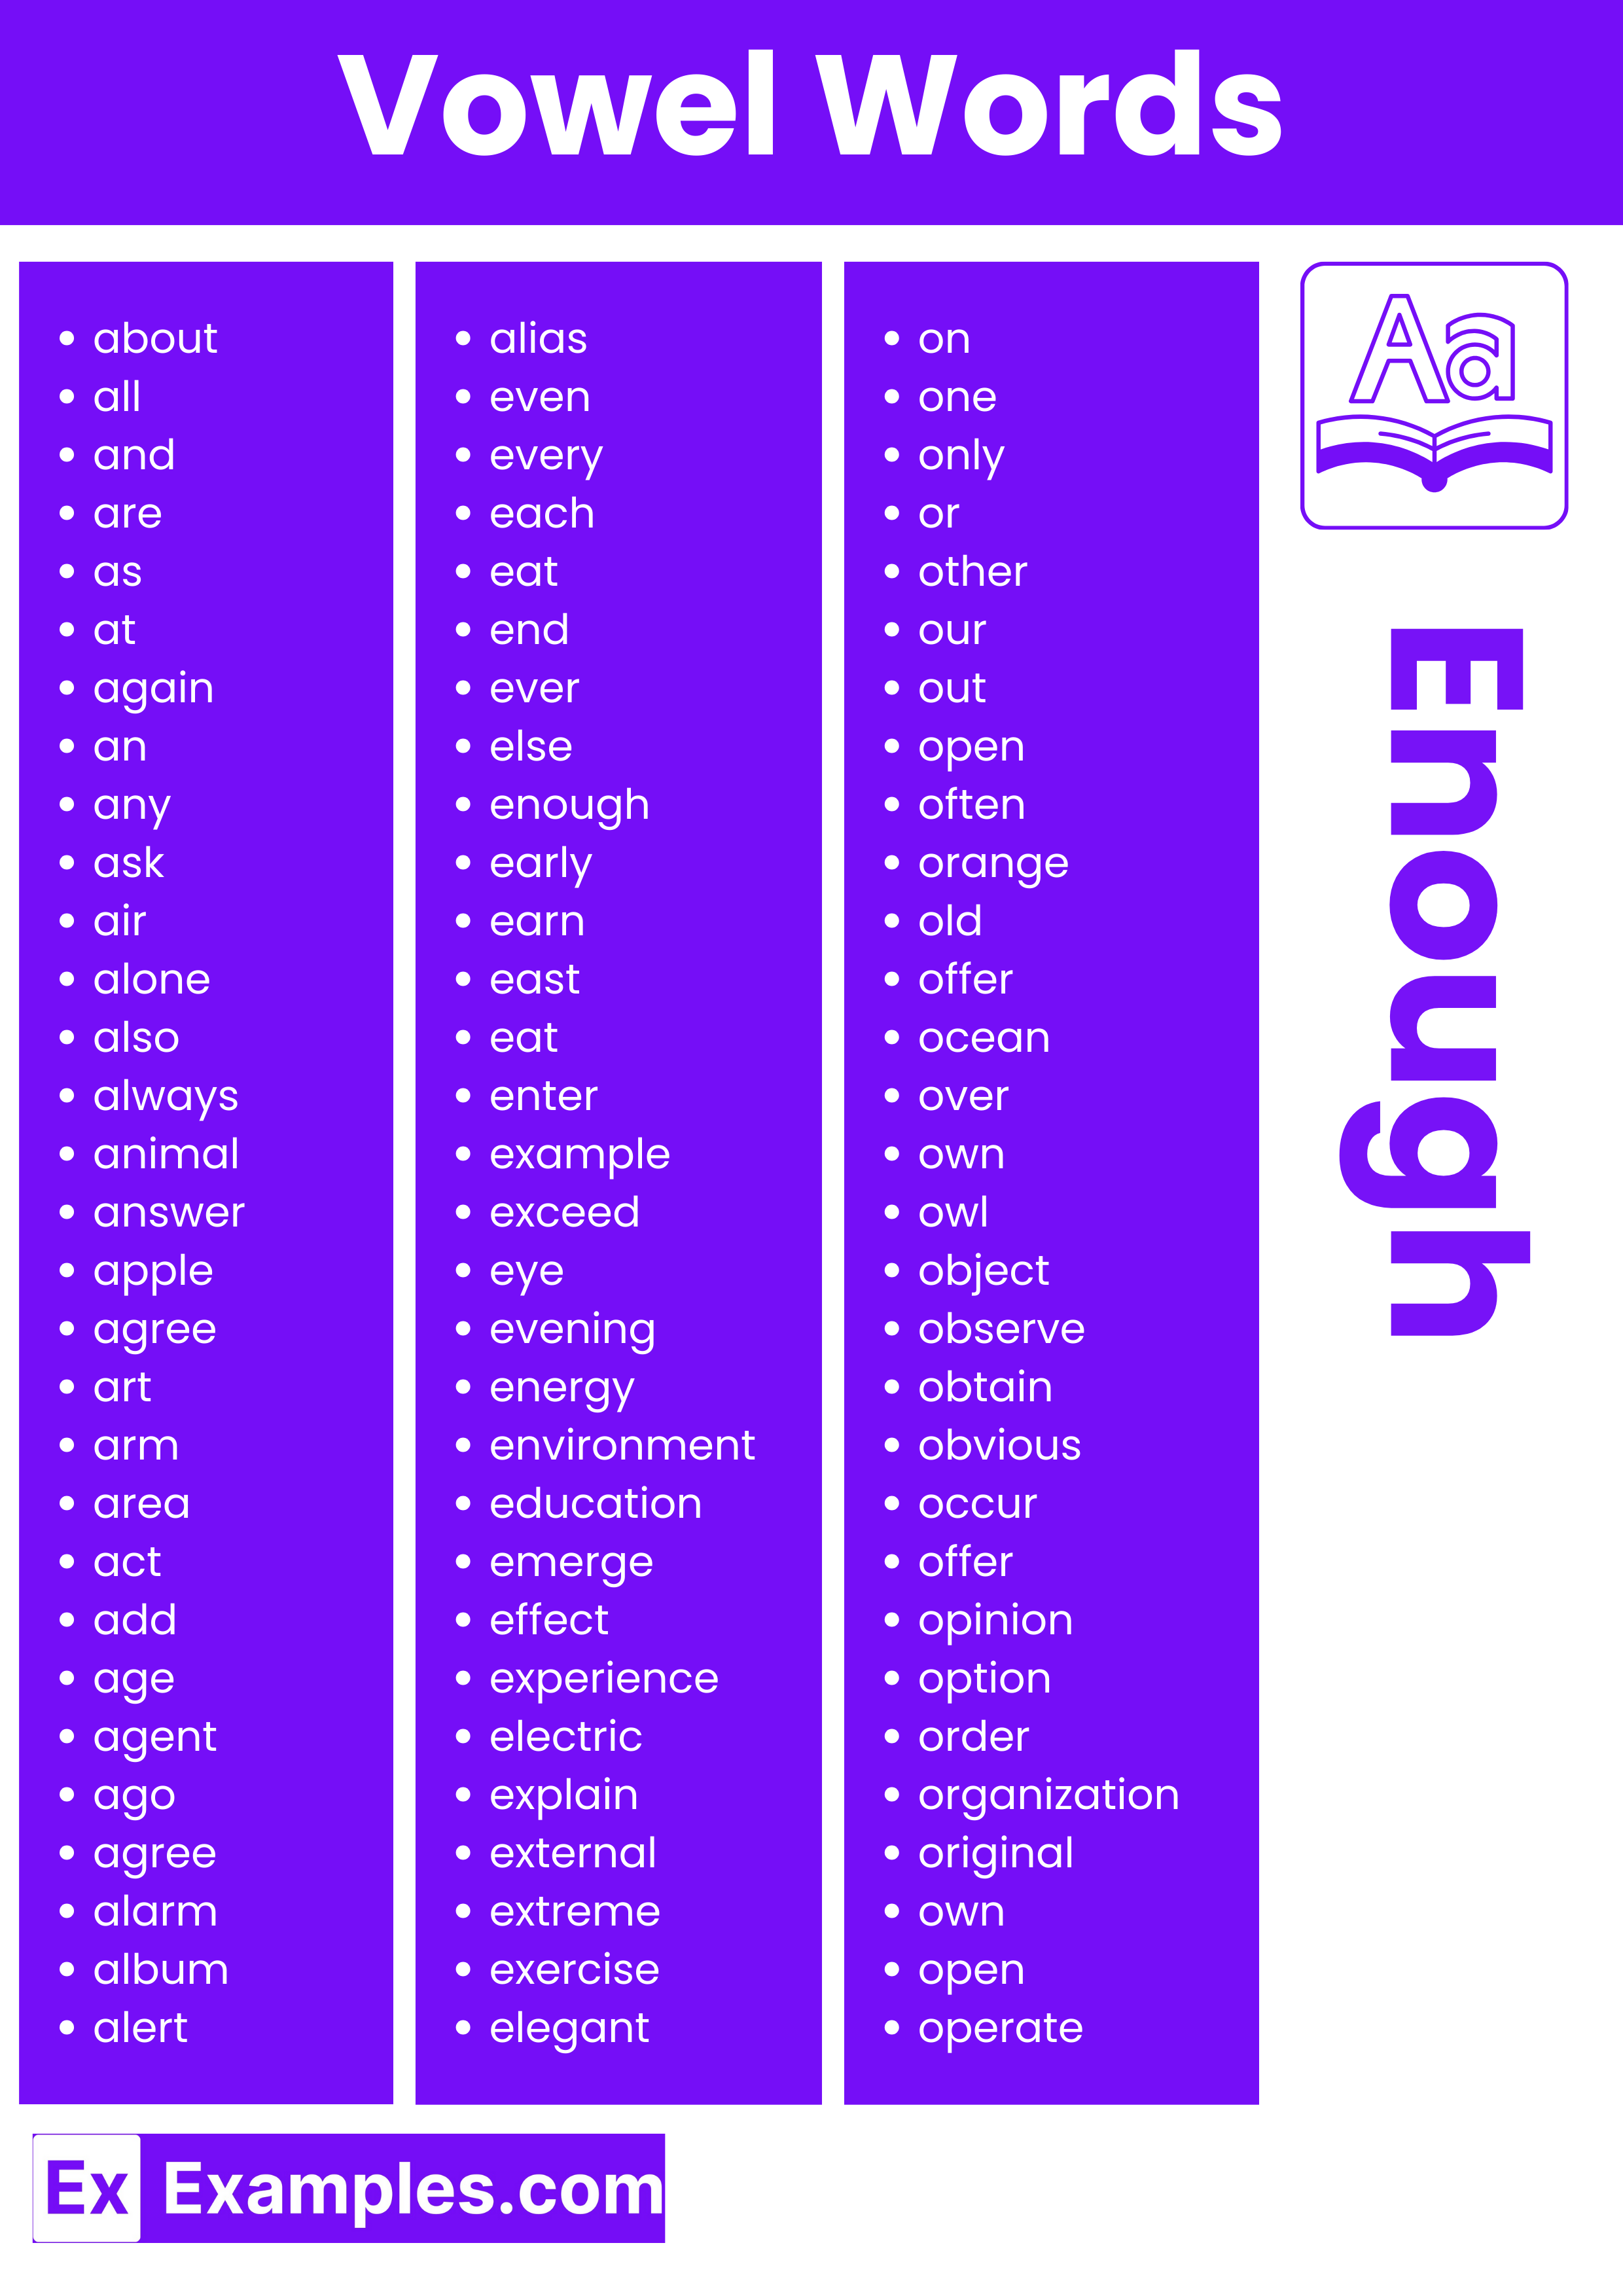 most commonly used a vowel words